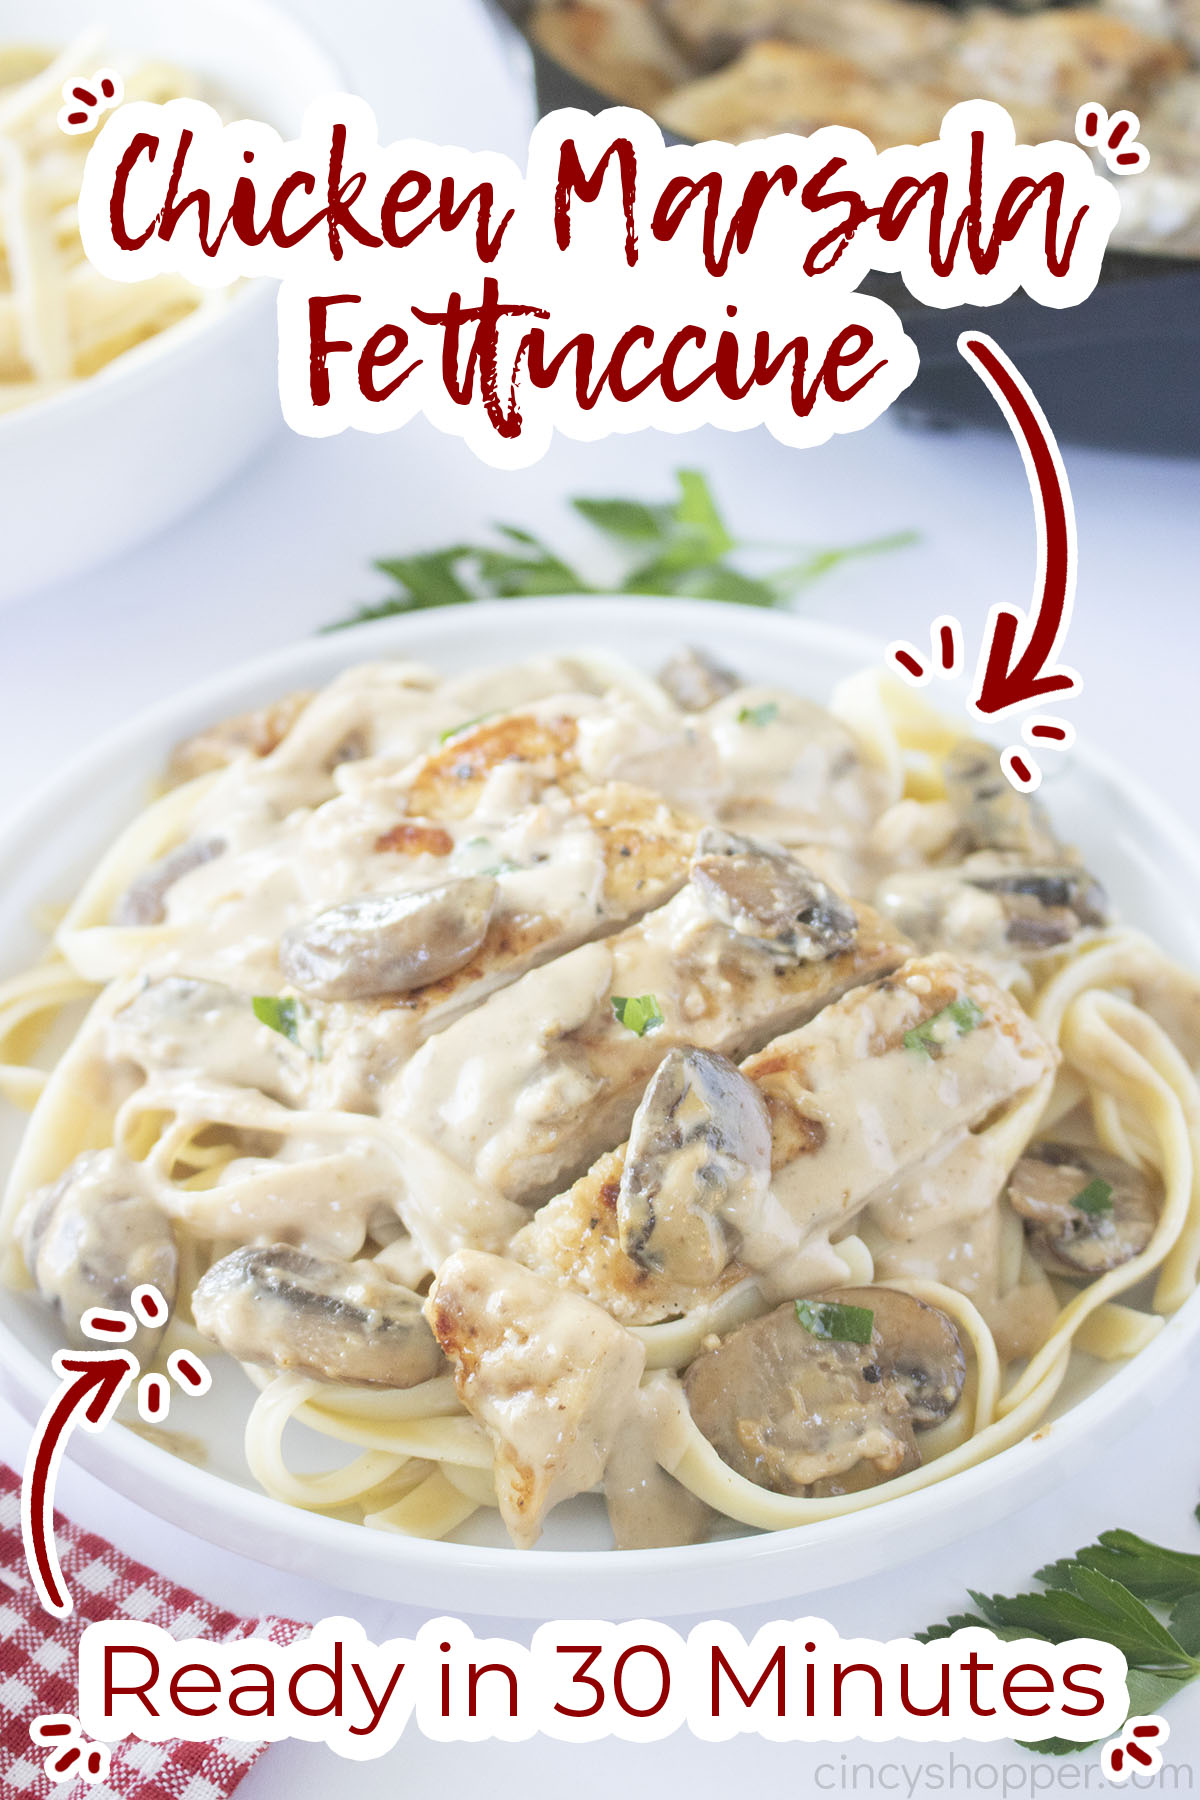 Text on image Chicken Marsala Fettuccine Ready in 30 Minutes.